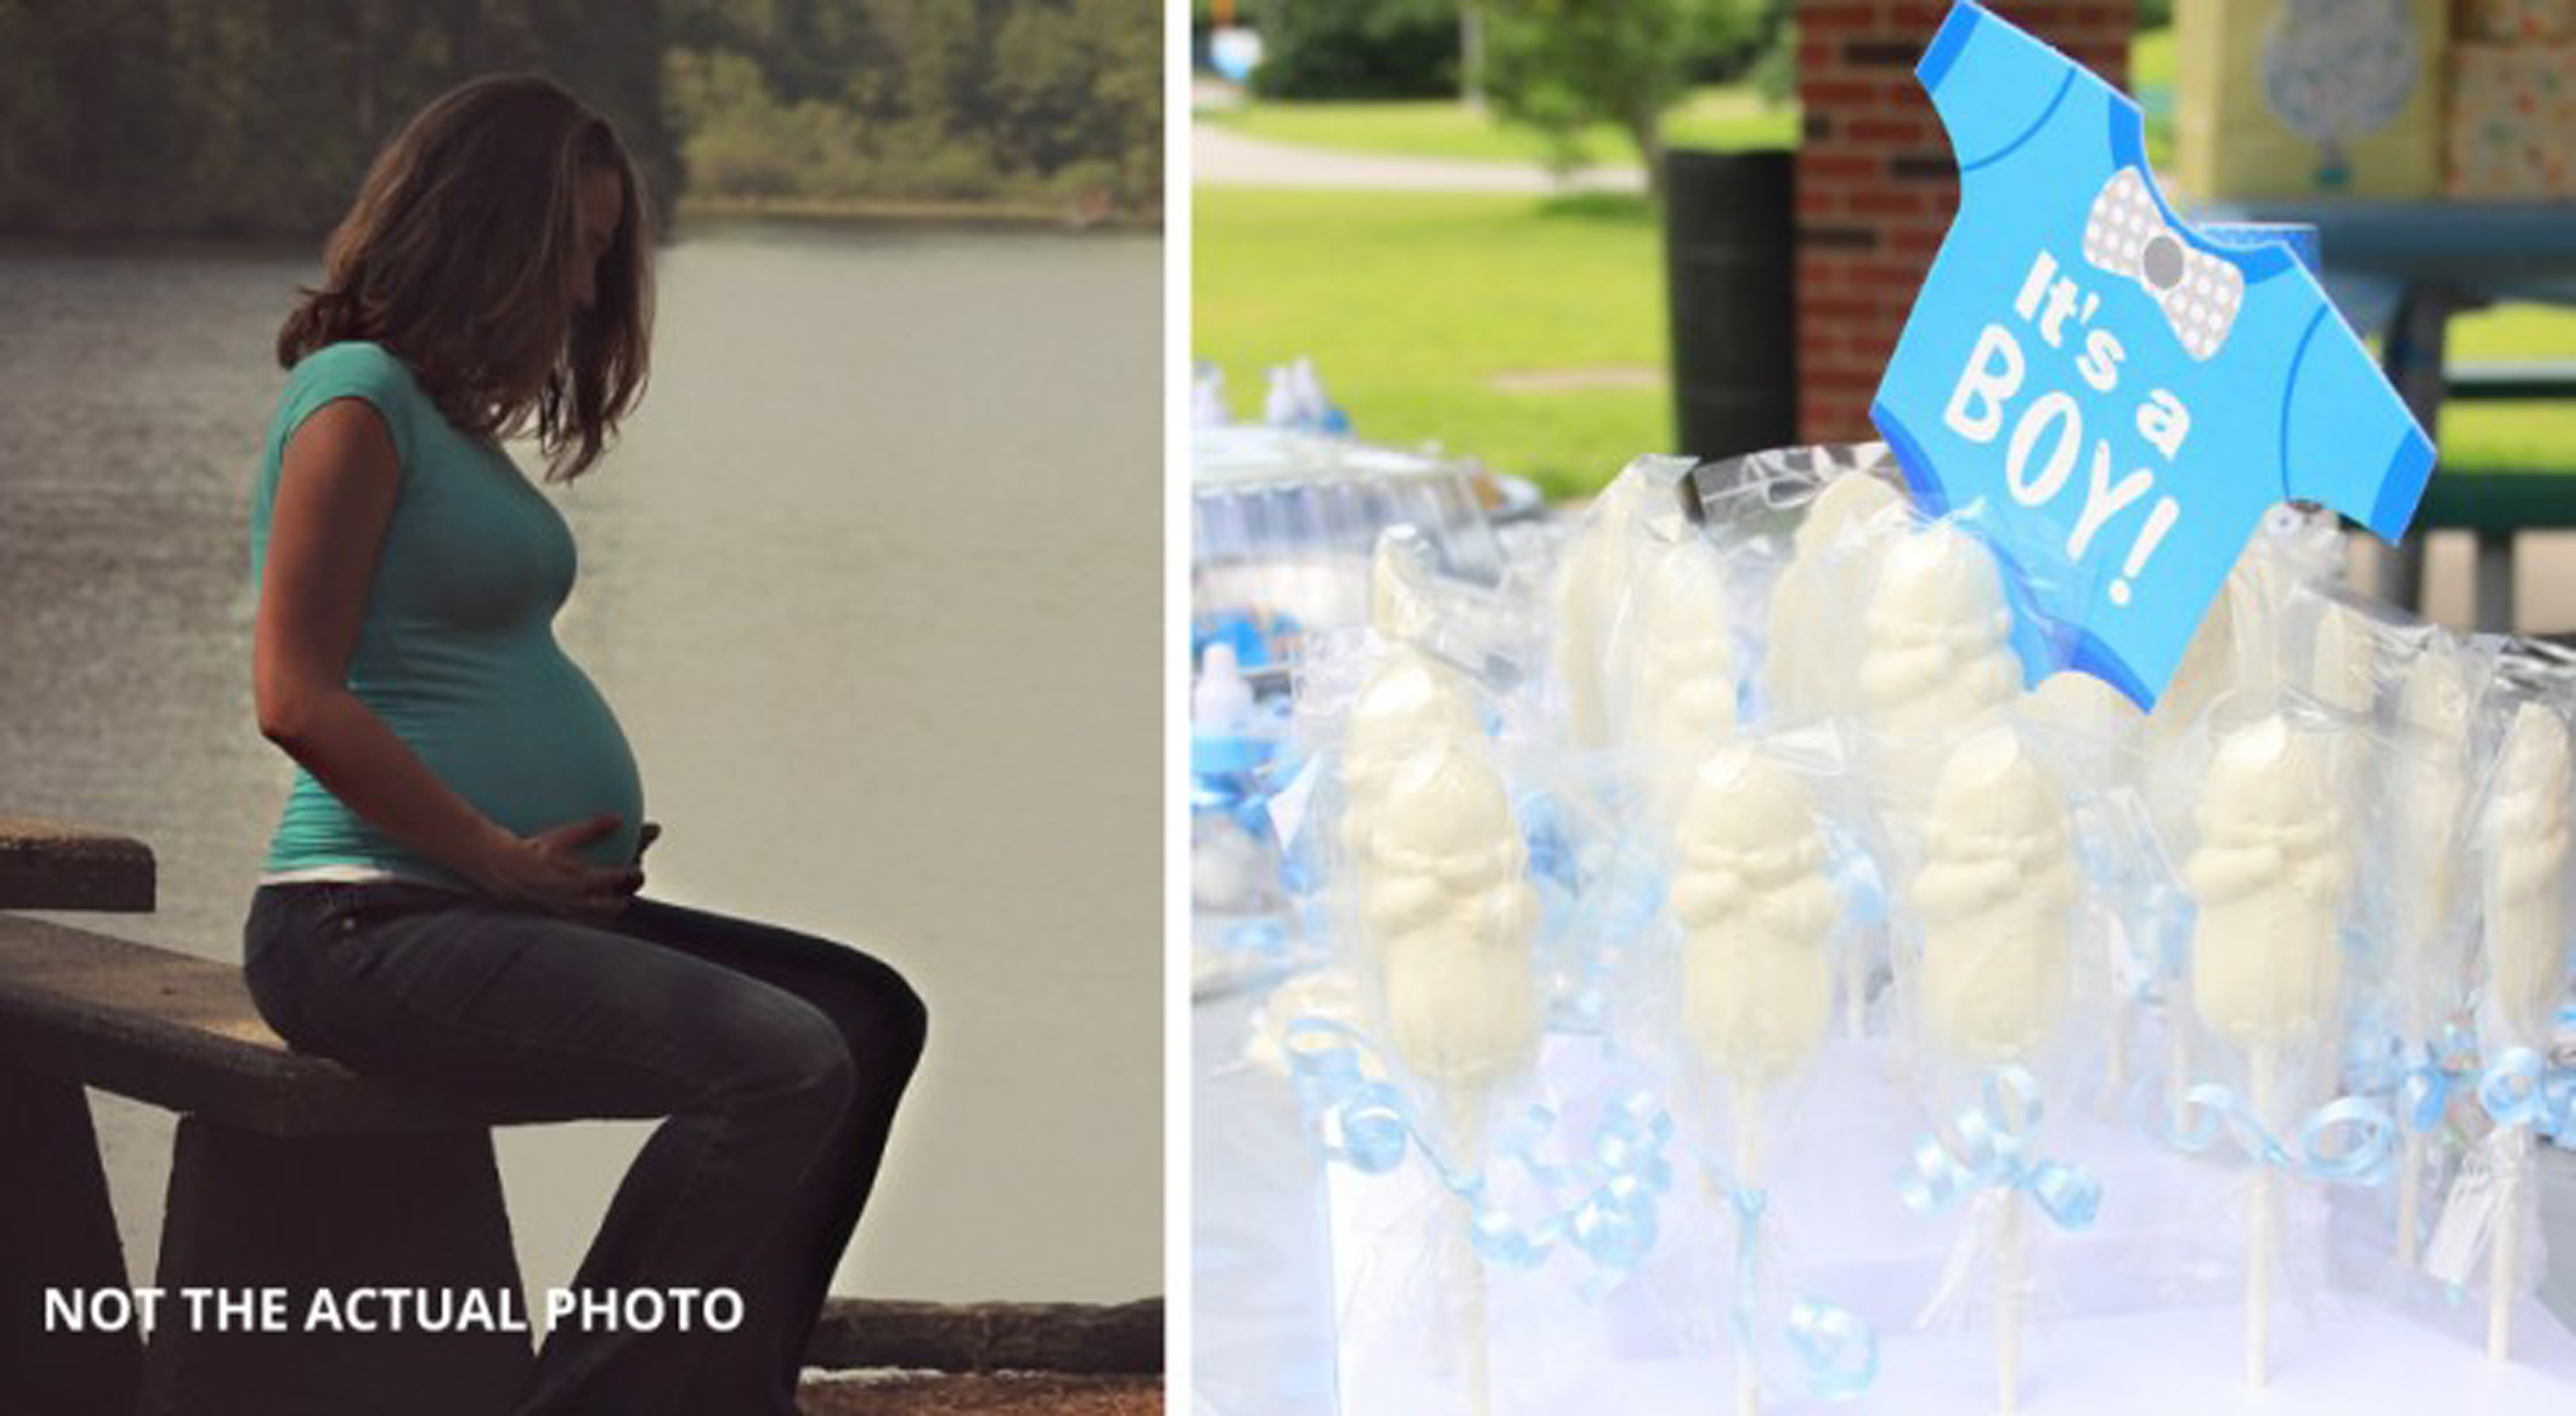 Woman discovers she is expecting a baby girl, but her husband's family throws a party using blue decorations